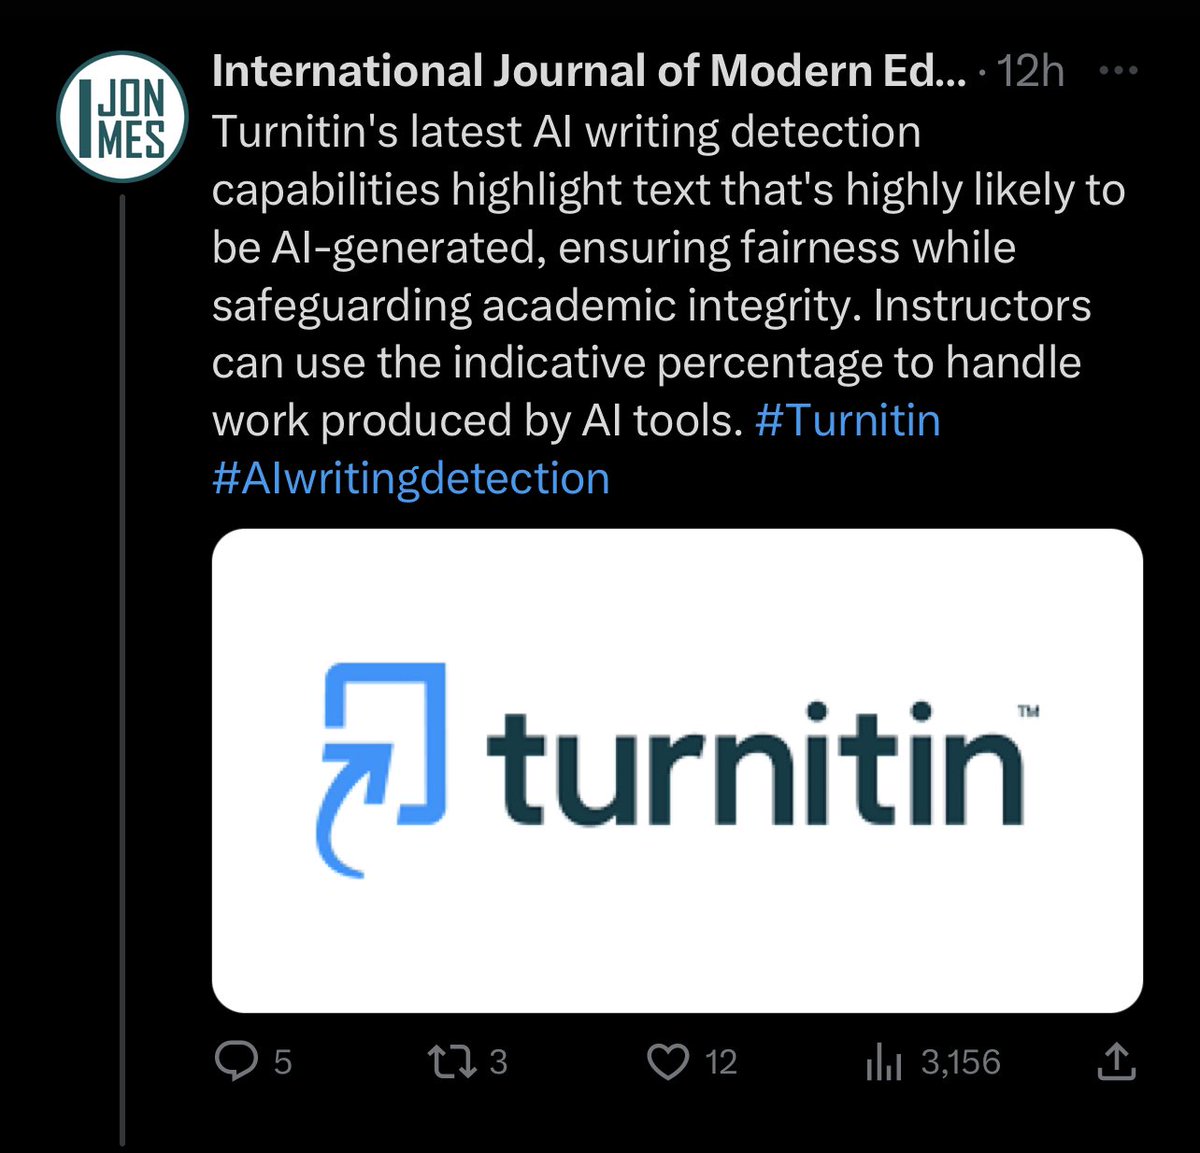 @JesmaJournal Is Turnitin paying journals to advertise for them? Or do these 2 journals belong to the same publisher?